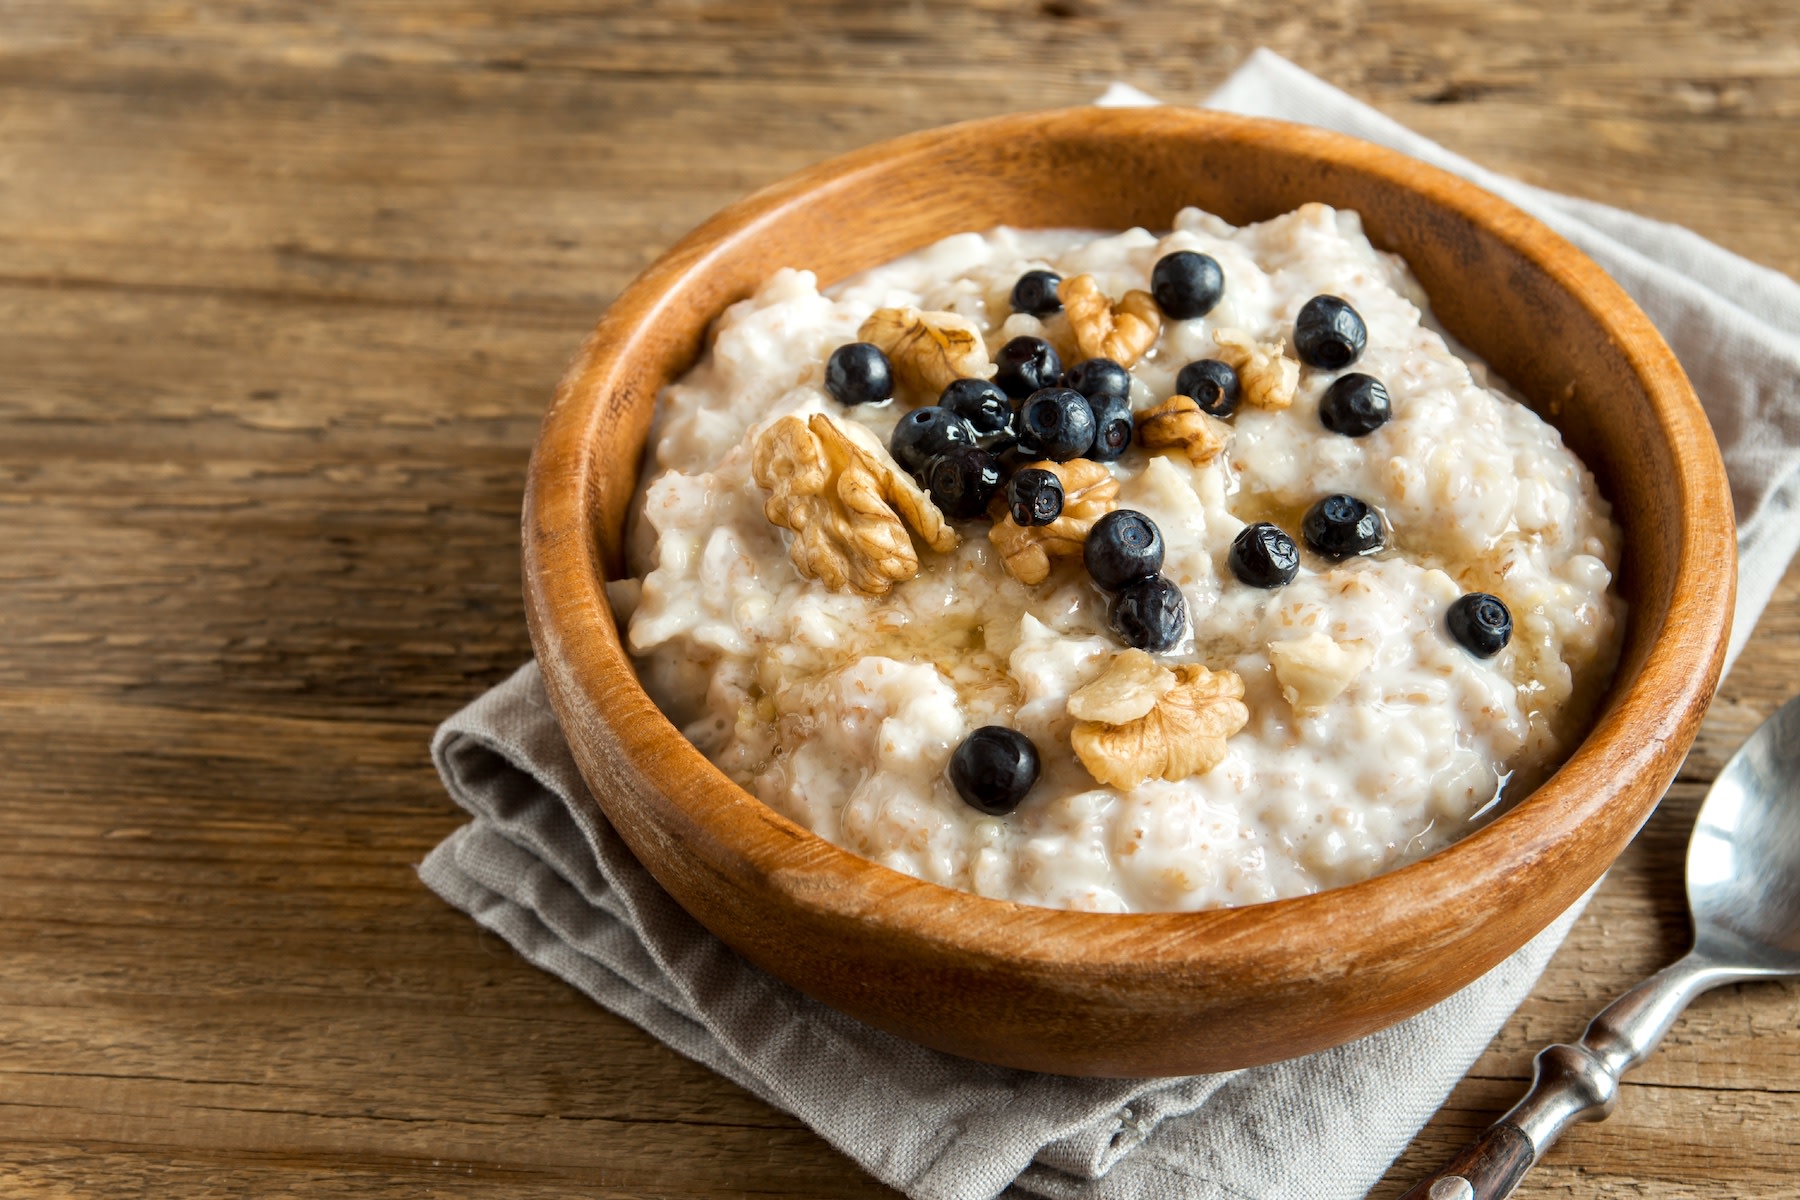 A wooden bowl of oatmeal, walnuts, and blueberries, which is a great bedtime snack to help you sleep.